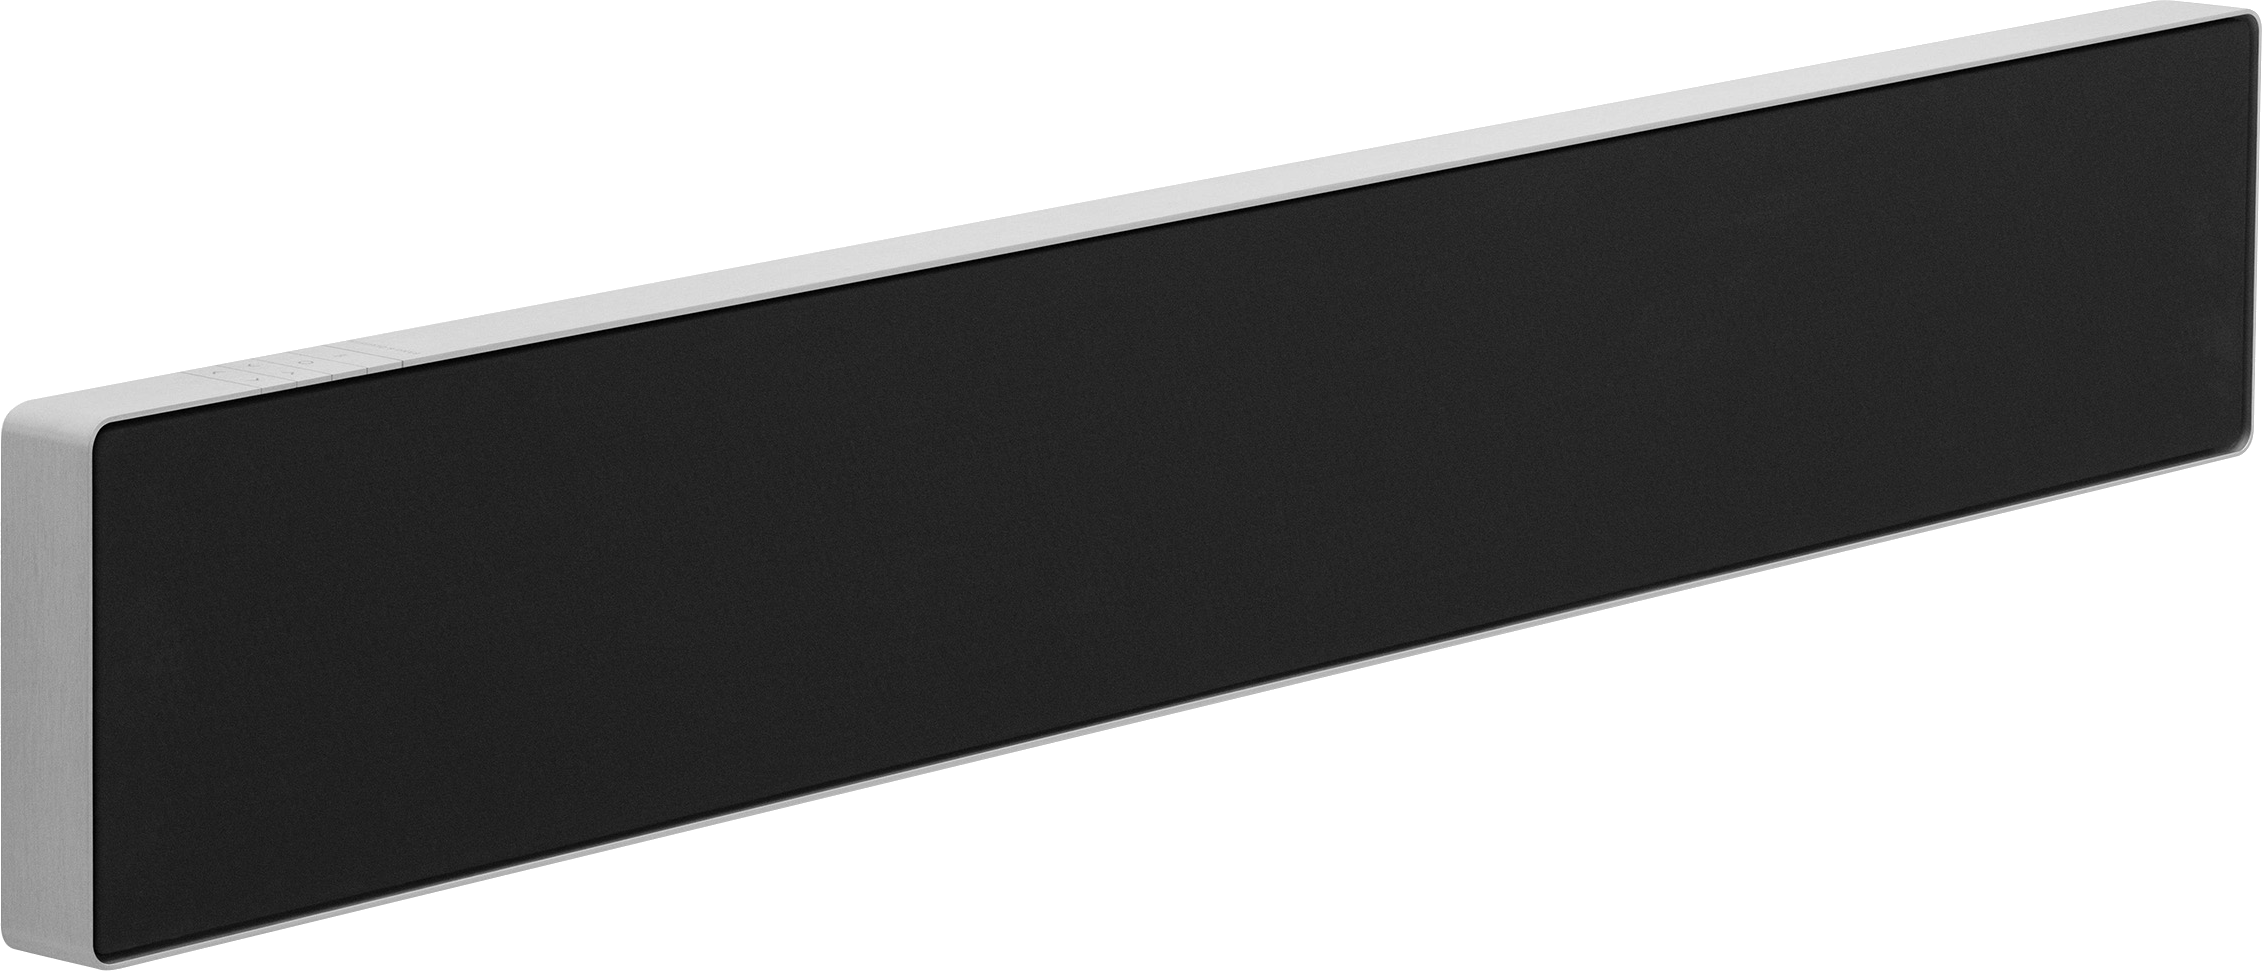 Bang & Olufsen Beosound Stage All-in-One Soundbar with Built-In Subwoofer and Dolby Atmos - Black / Aluminium, Black